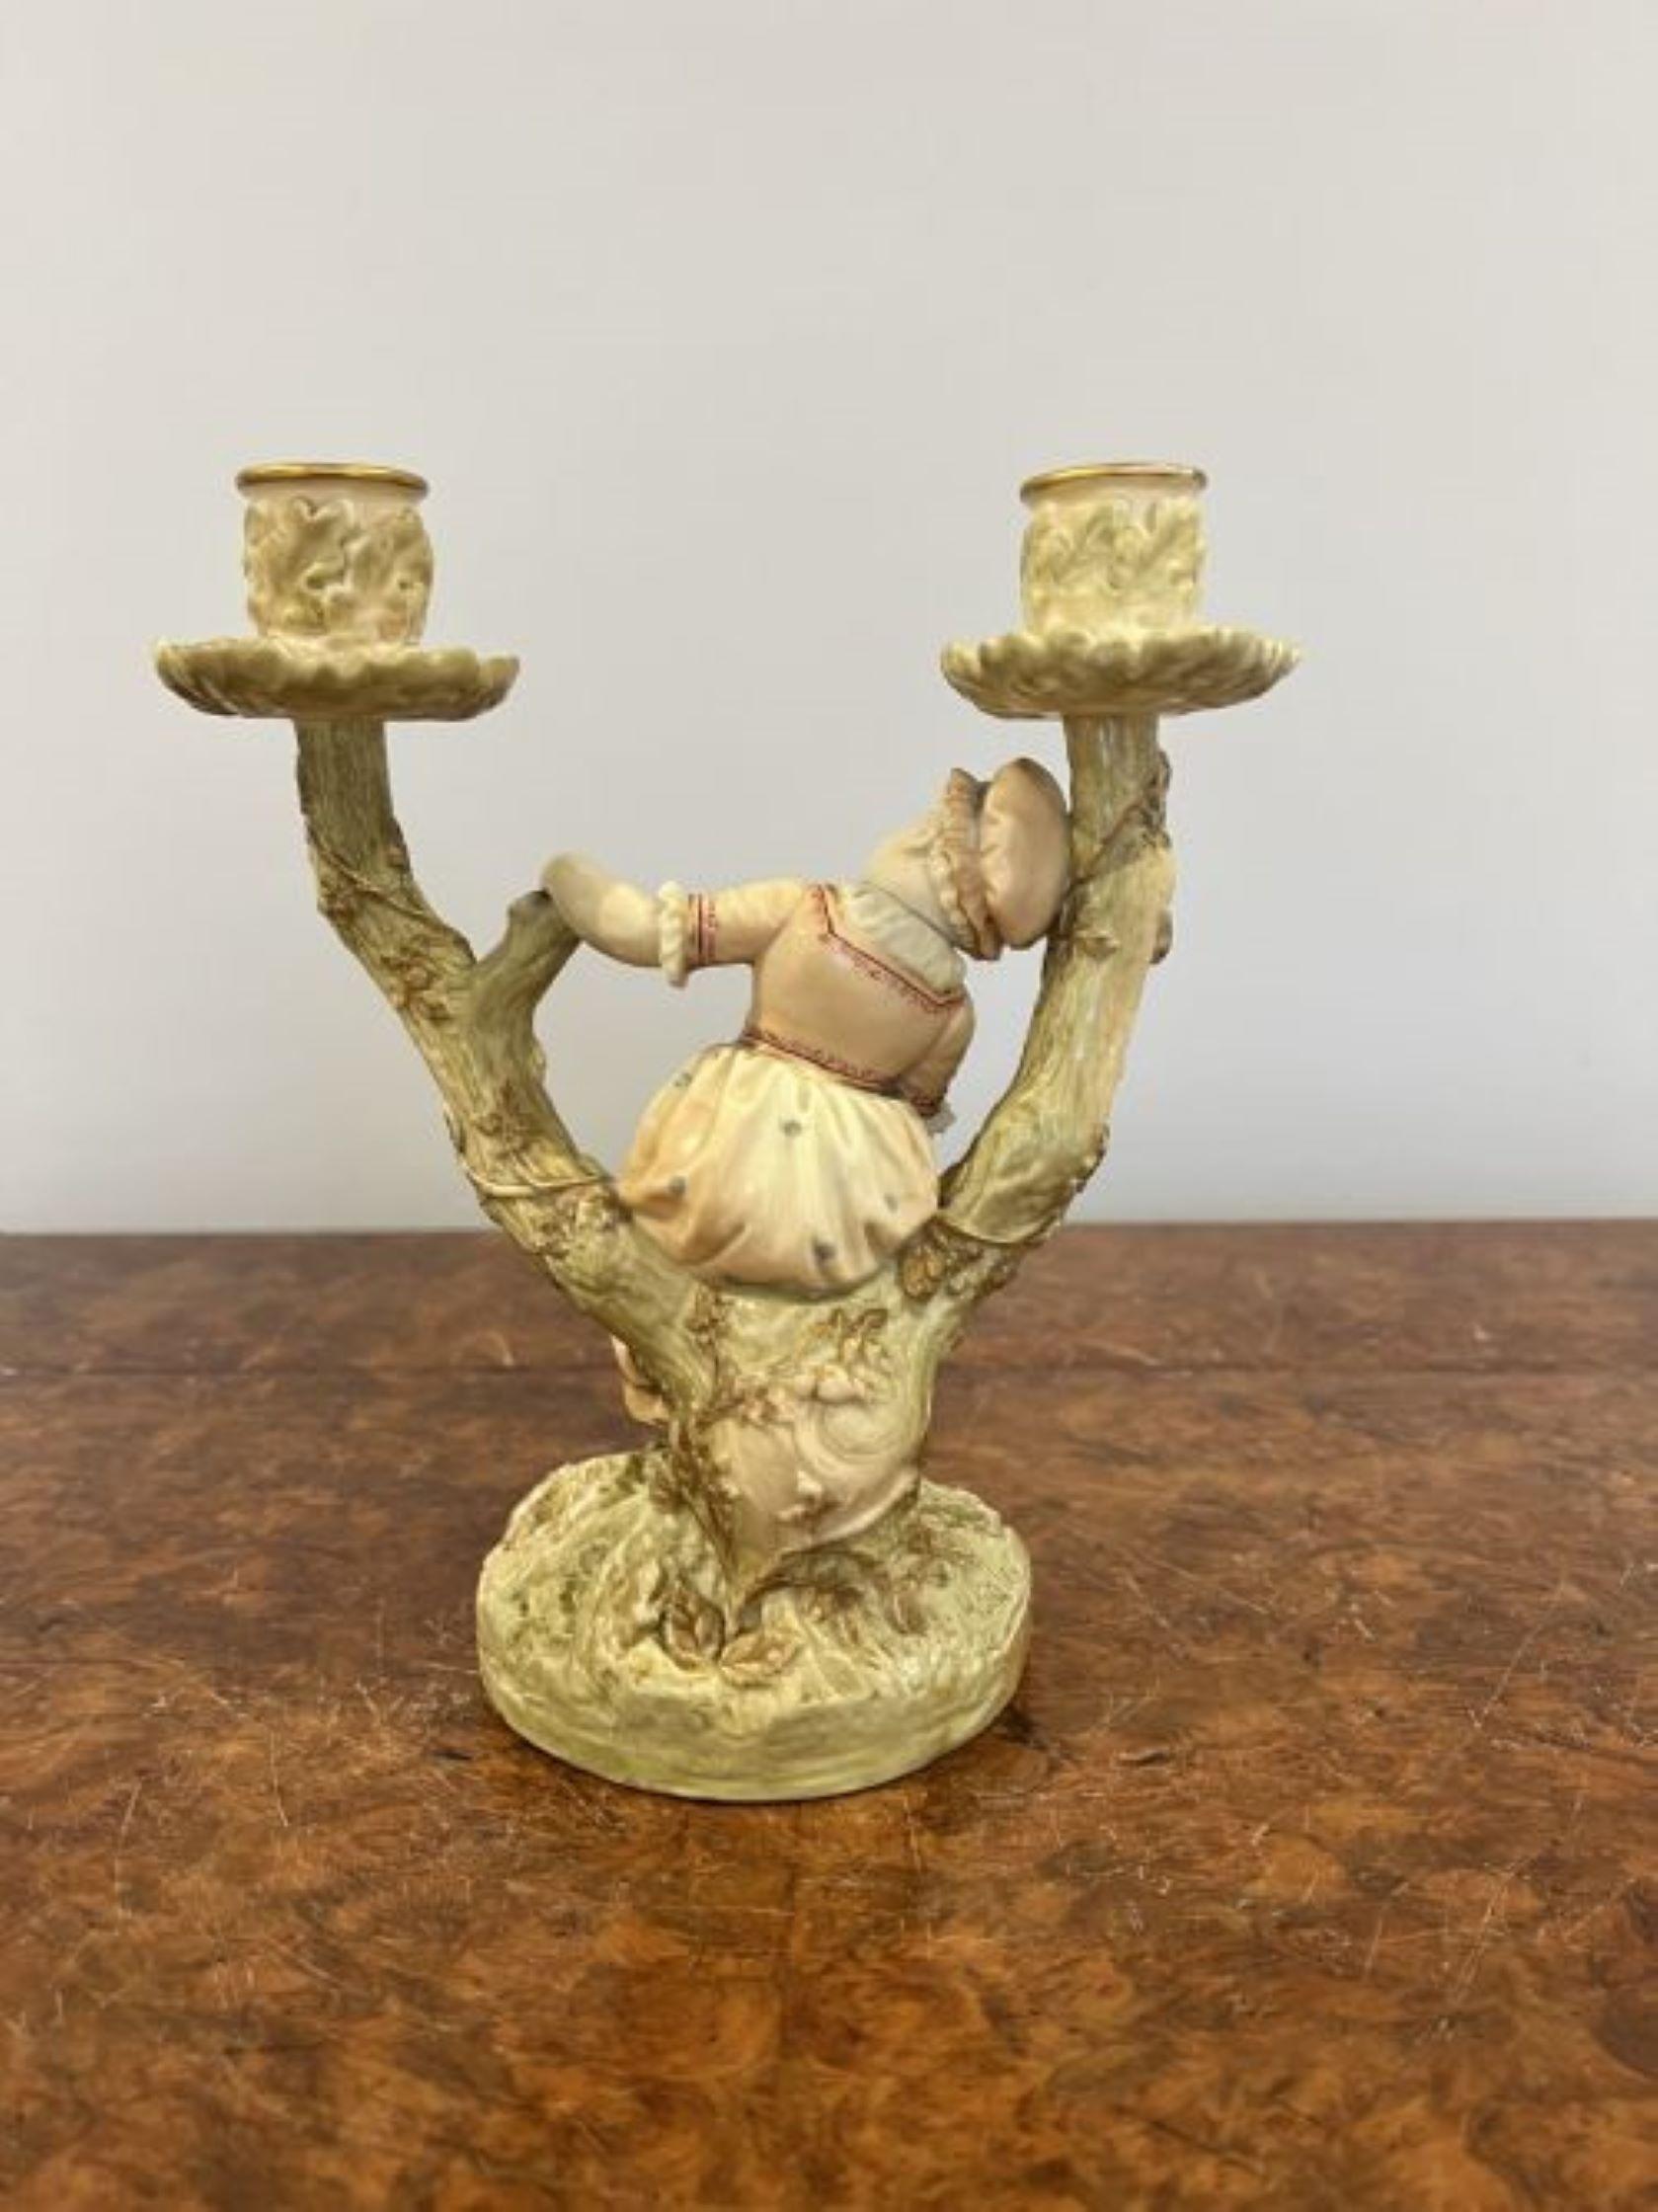 Quality pair of antique Royal Worcester Hadley candlesticks having a quality pair of candlesticks with figures modelled as children hand painted in wonderful green, pink, red and yellow colours leaning against branches with two candle sconces at the